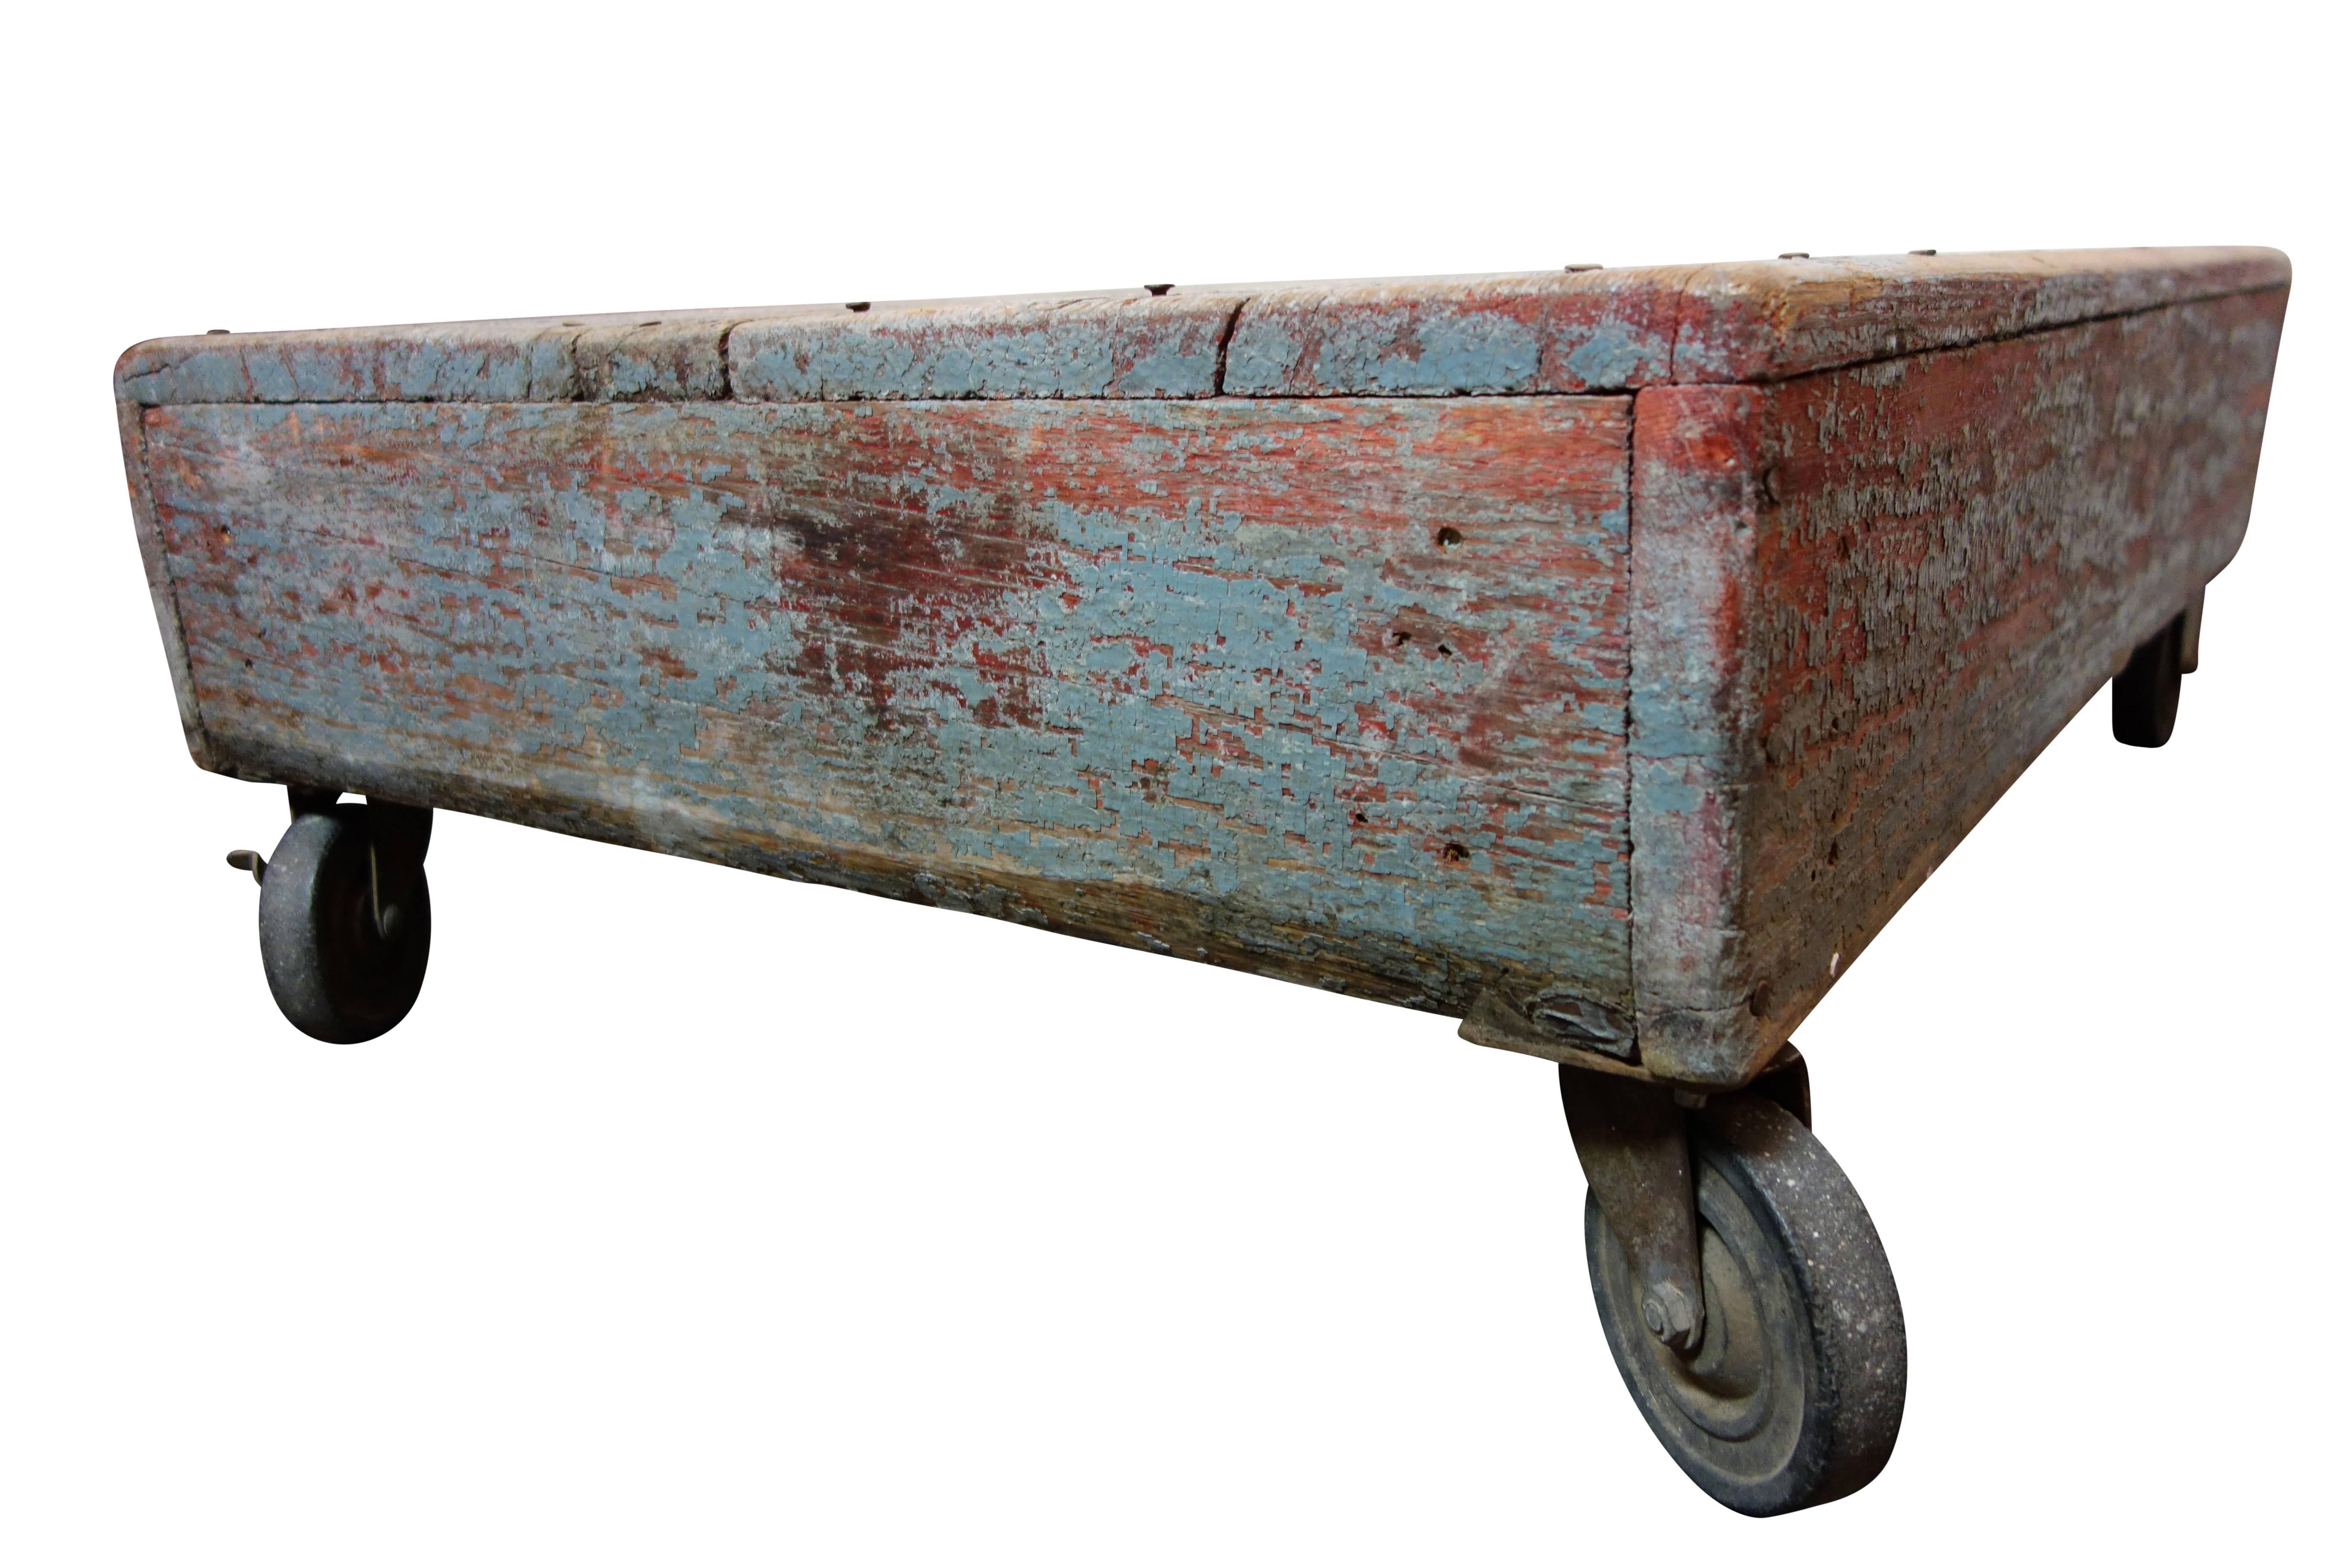 This is a gray and red painted wood industrial cart on casters from Texas.